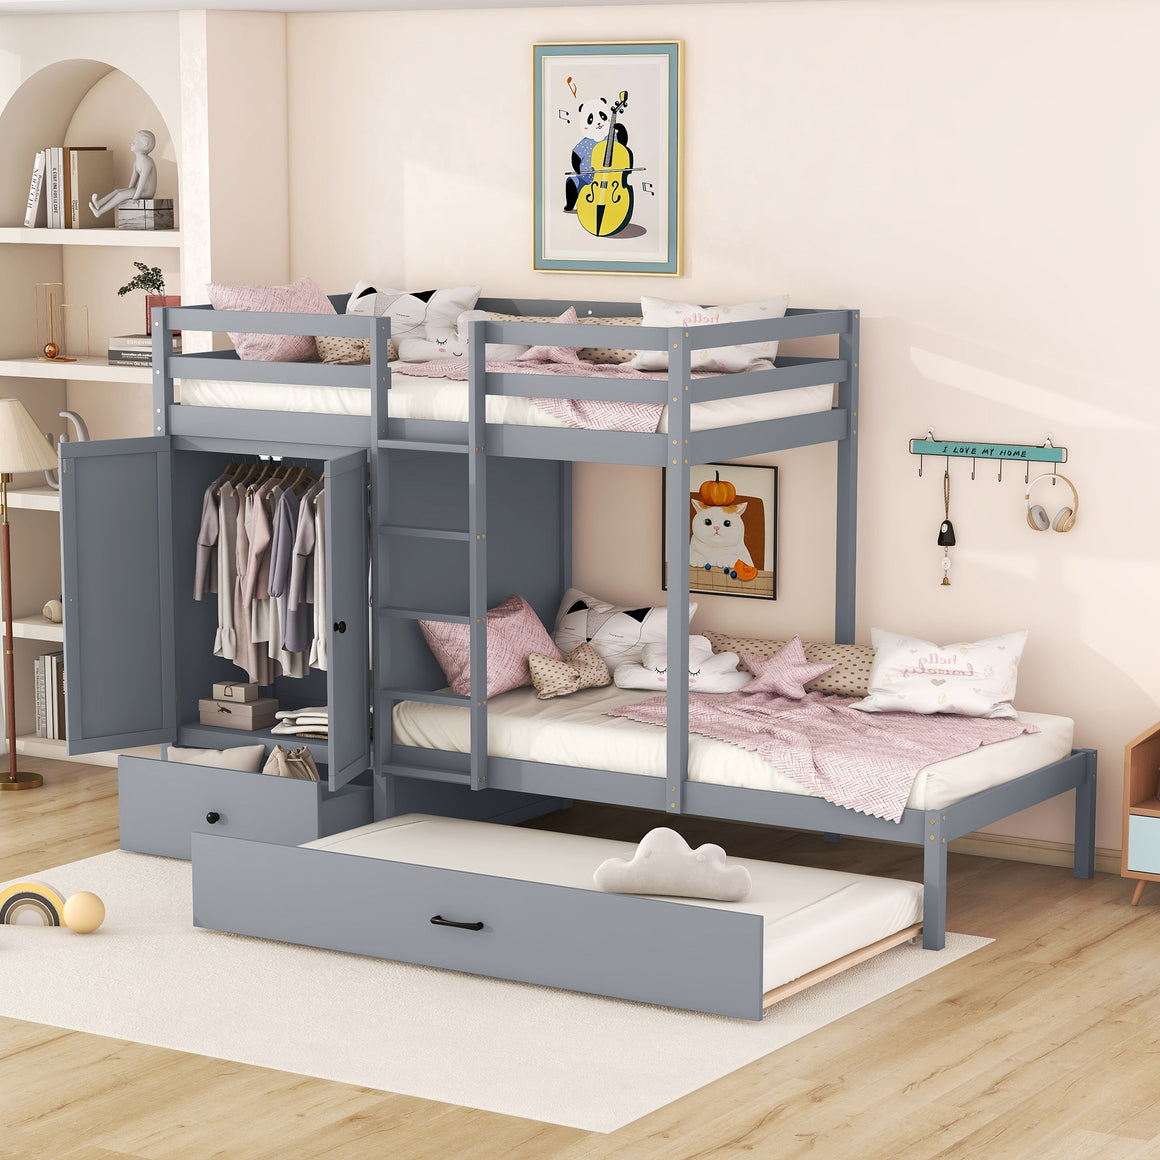 uhomepro Twin over Twin Bunk Bed, Wood Bunk Bed with Wardrobe, Drawers Shelves for Kids Teens Adults Bedroom Dorm, No Box Spring Required, Gray